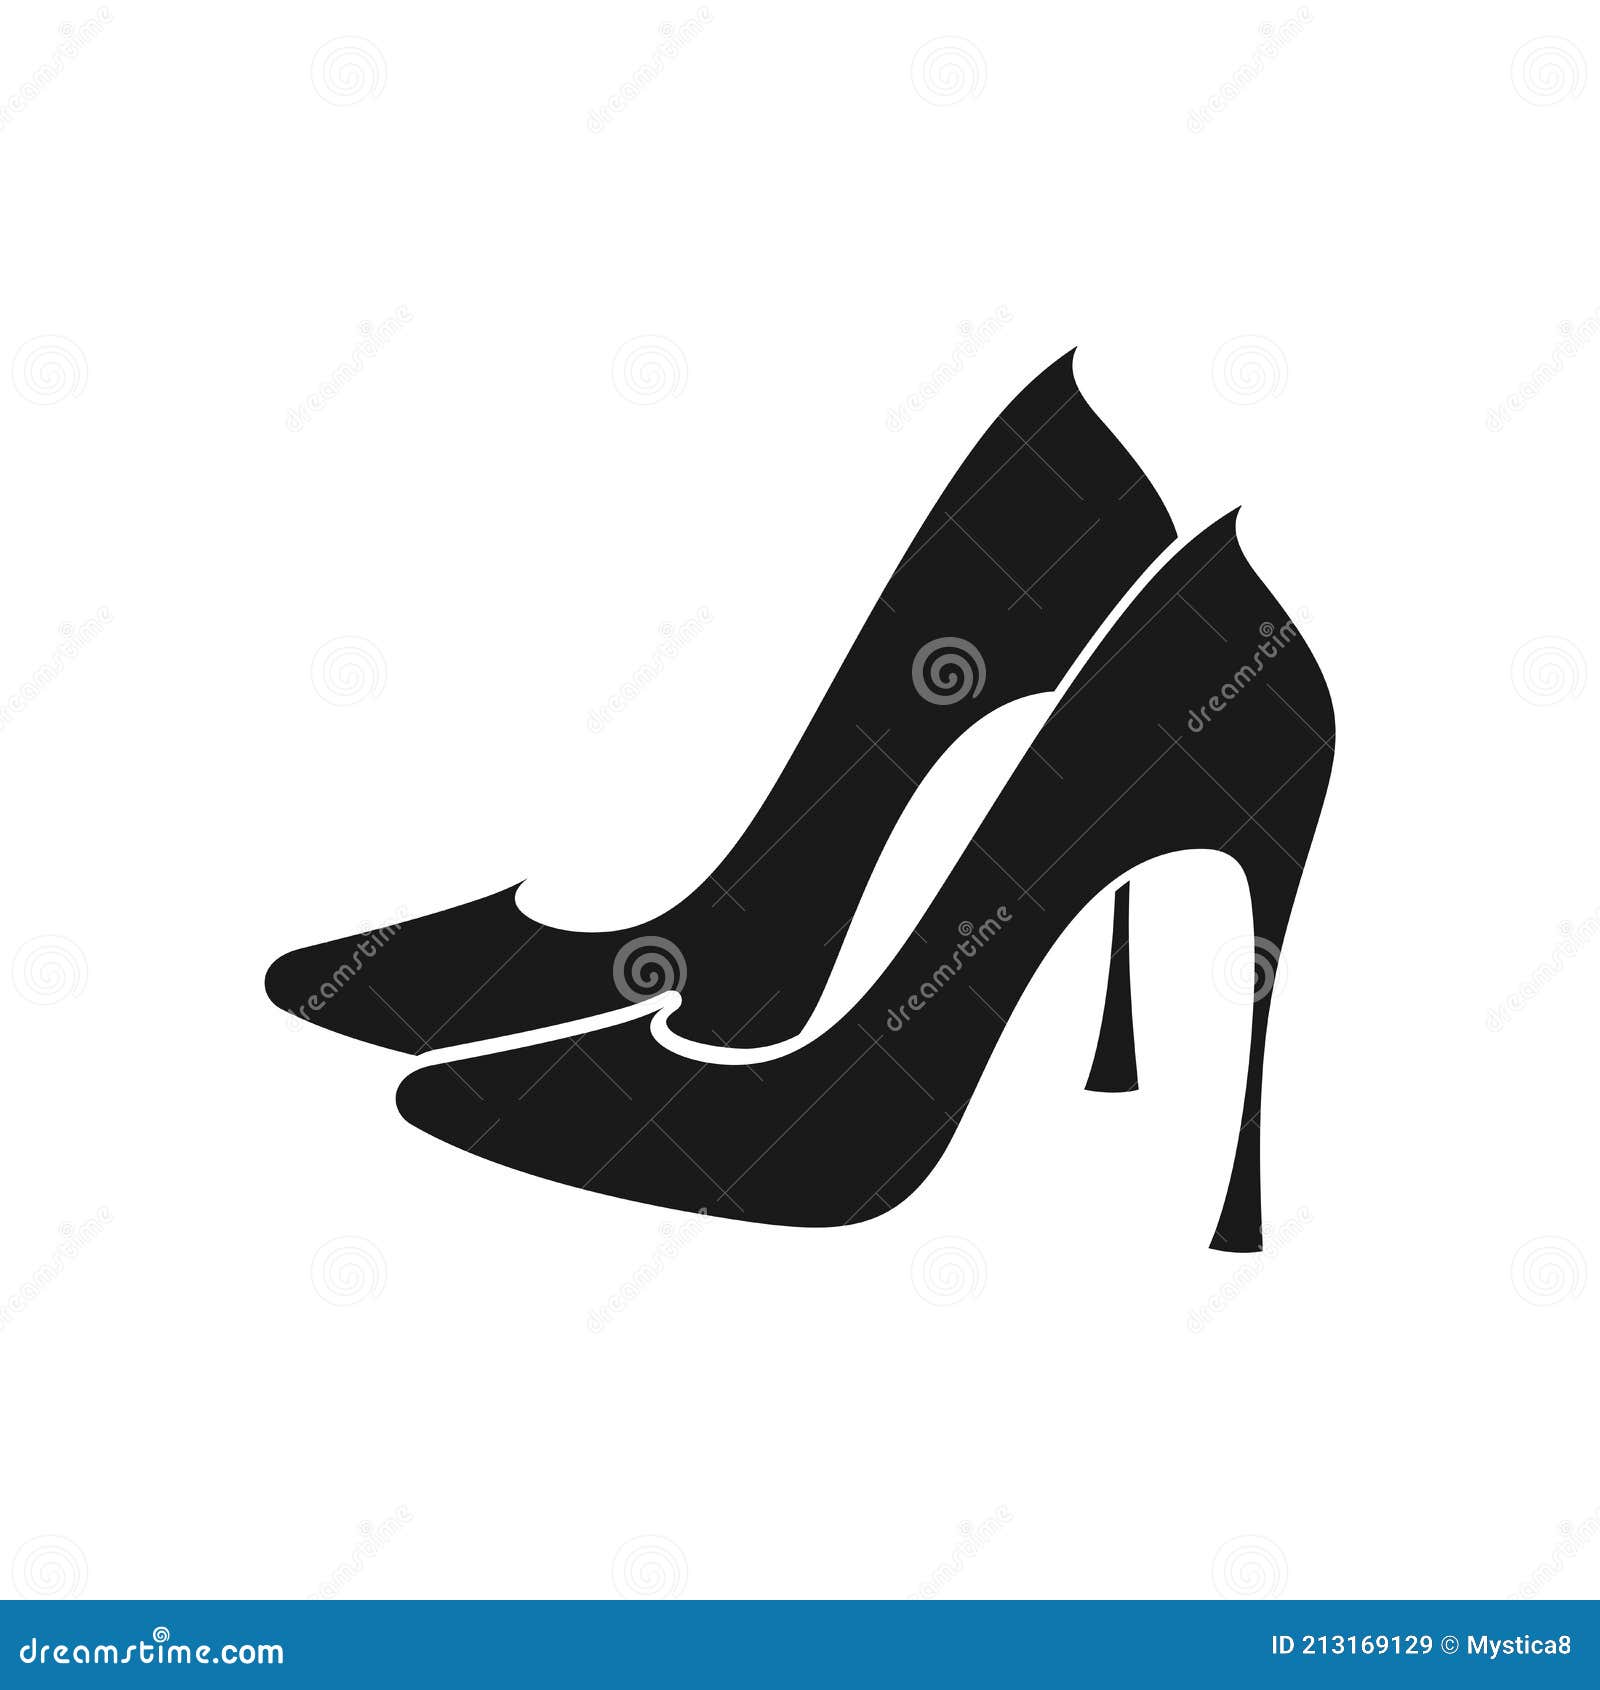 Silhouette of a Pair of Ladies High Heels Shoes for Fashion Design Stock Vector - Illustration of heels, ladies: